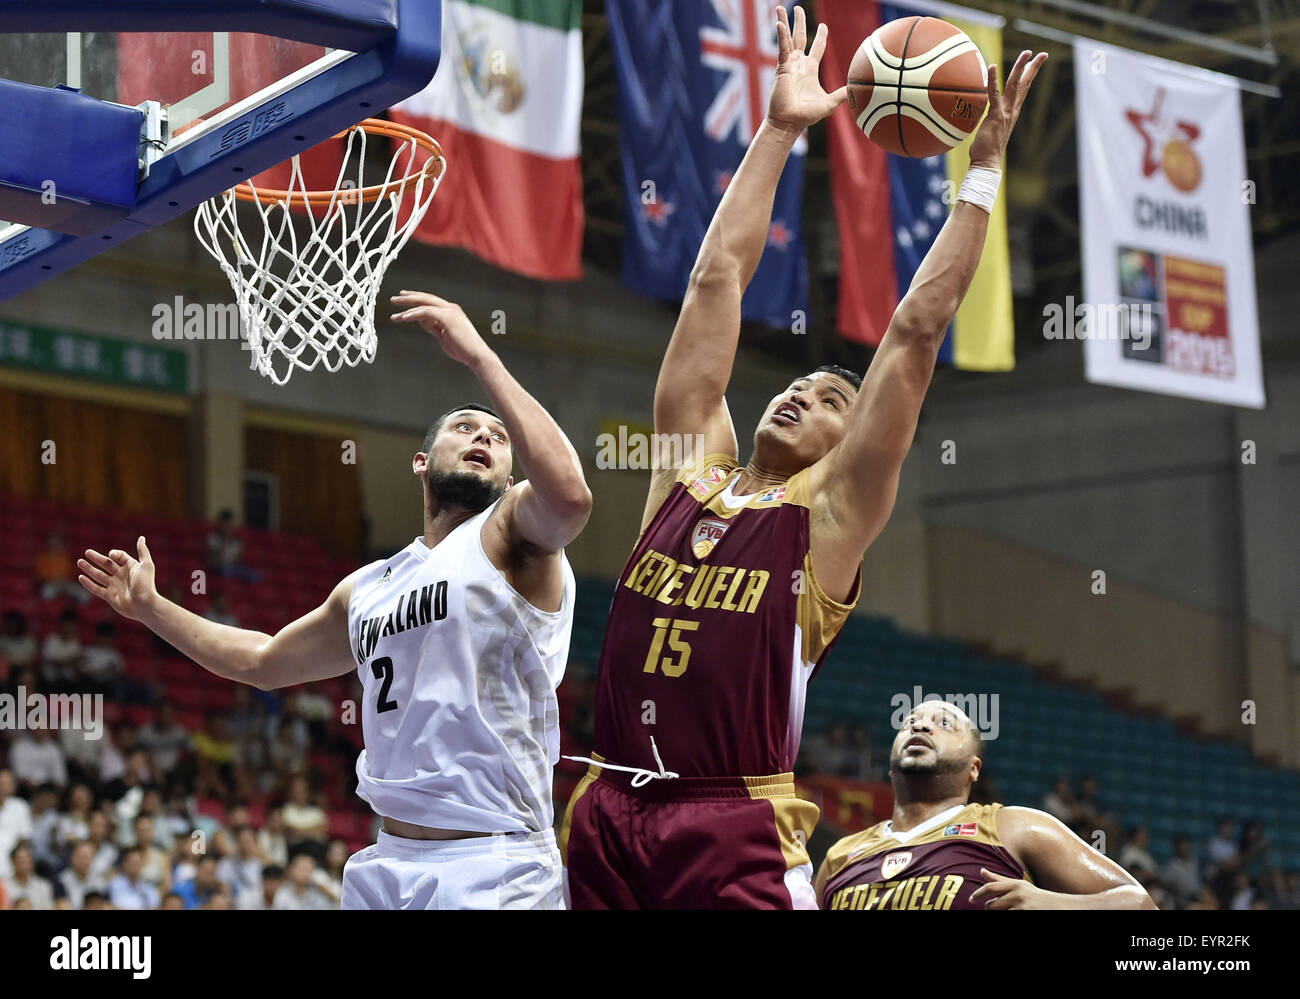 Qingyuan, China's Guangdong Province. 3rd Aug, 2015. Windi Graterol (R) of Venezuela competes during the match against New Zealand at Stankovic Continental Cup 2015 in Qingyuan, south China's Guangdong Province, Aug. 3, 2015. New Zeanland won 72-65. Credit:  Liang Xu/Xinhua/Alamy Live News Stock Photo